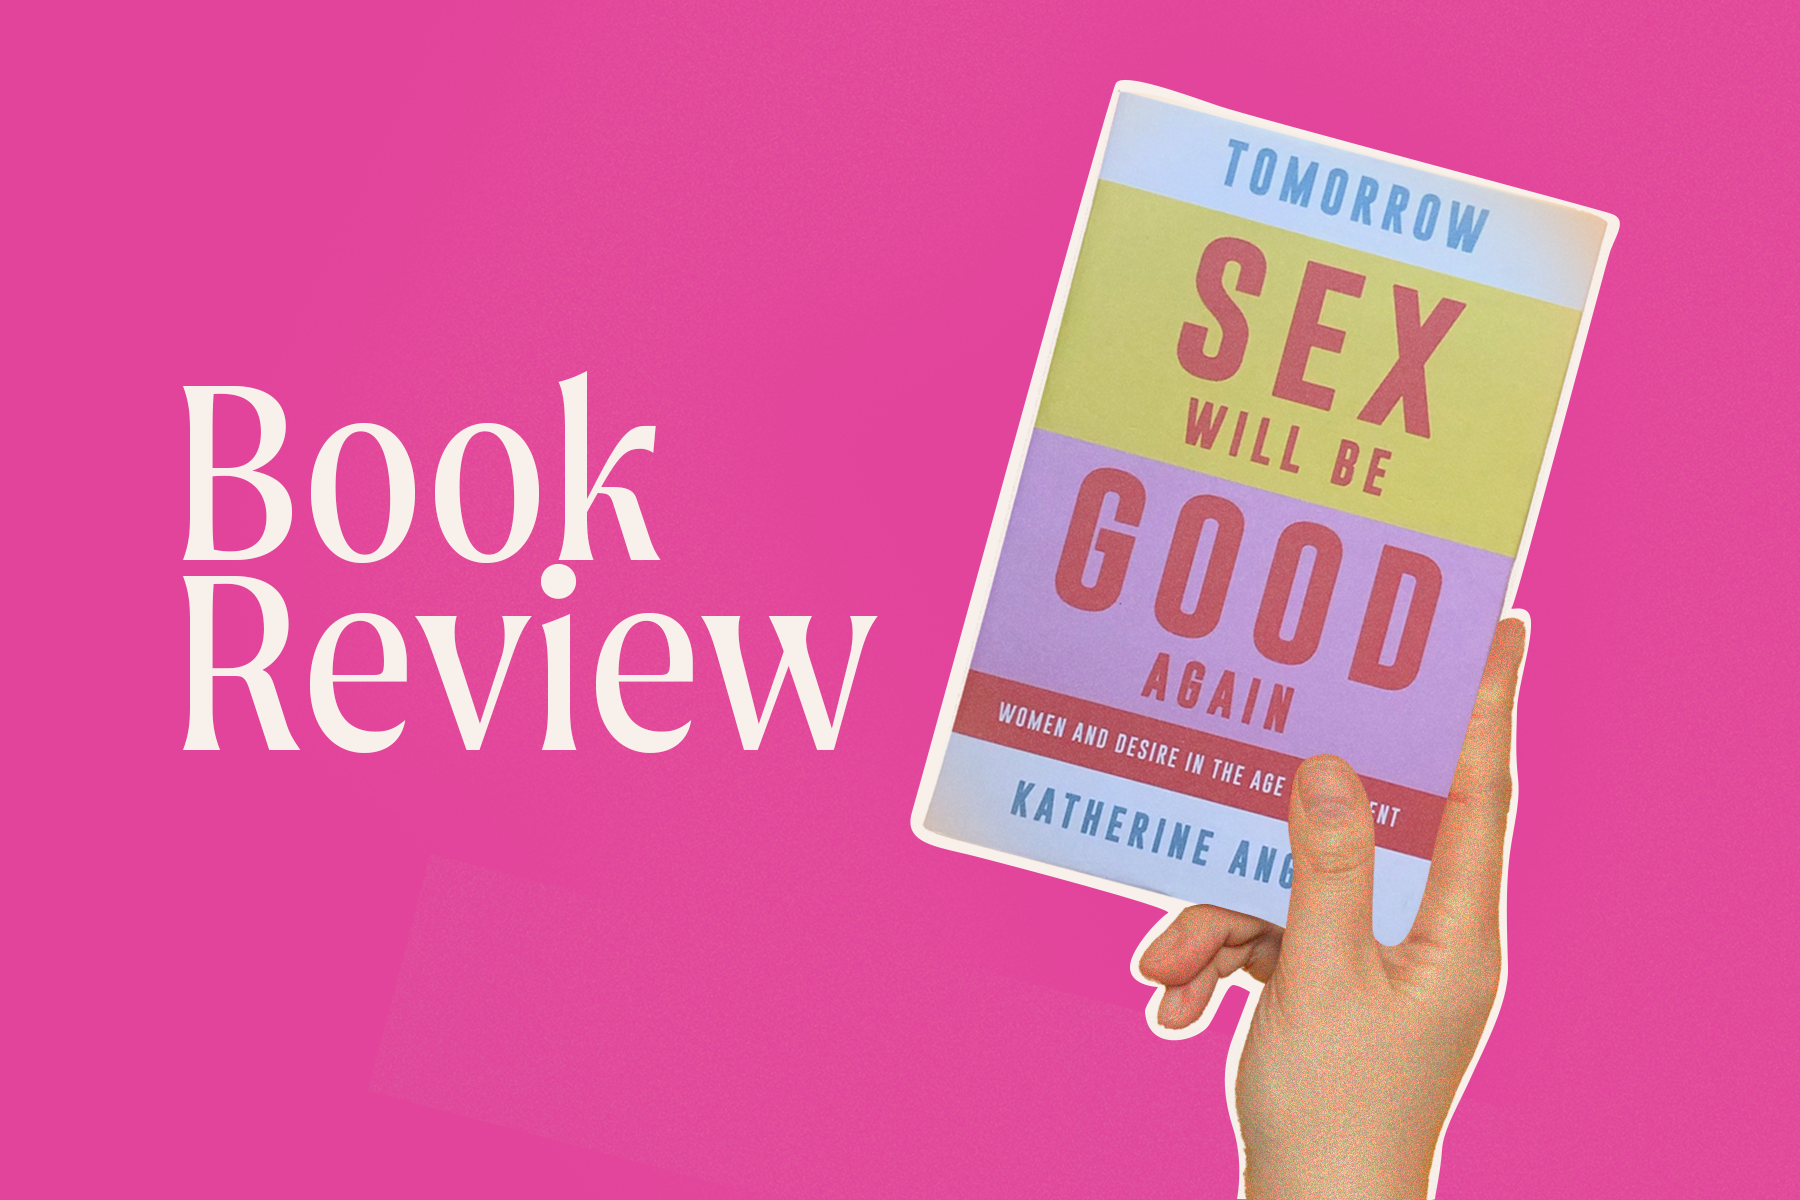 Your Next Feminist Read: 'Tomorrow Sex Will Be Good Again'